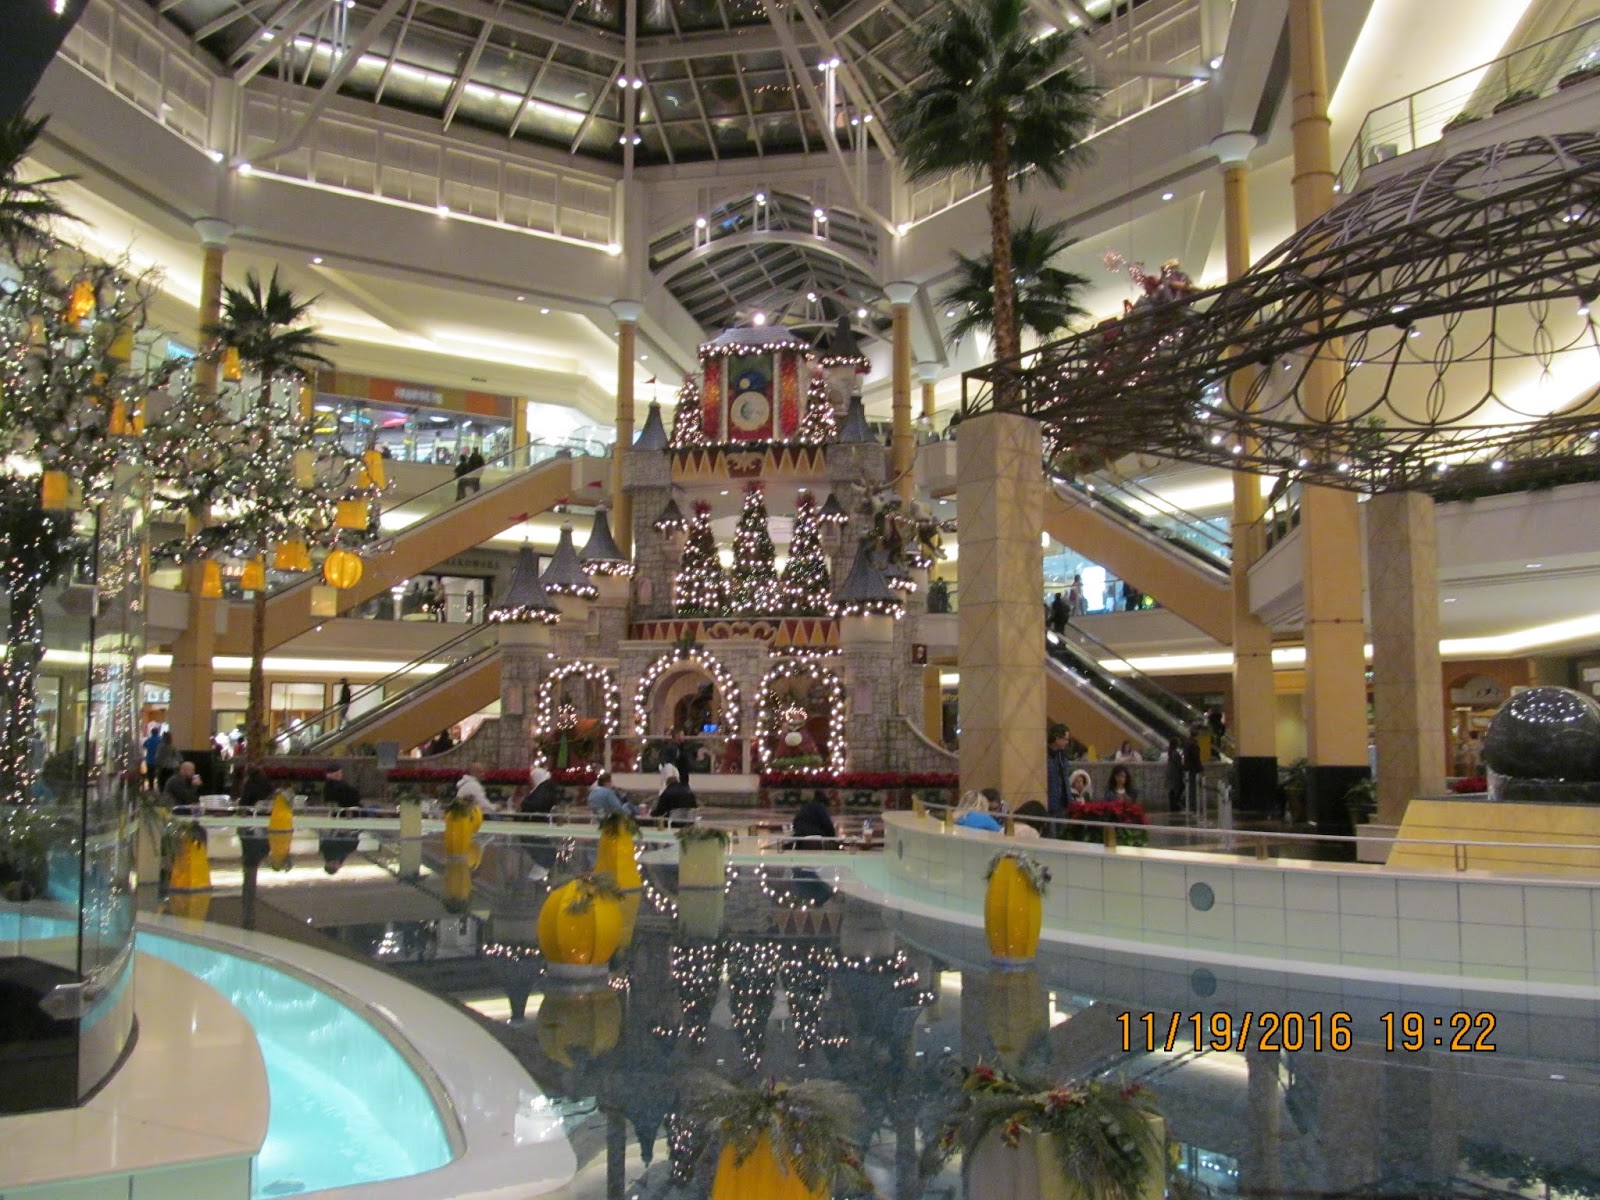 Livemalls - Somerset Mall; Troy, Michigan. The mall has